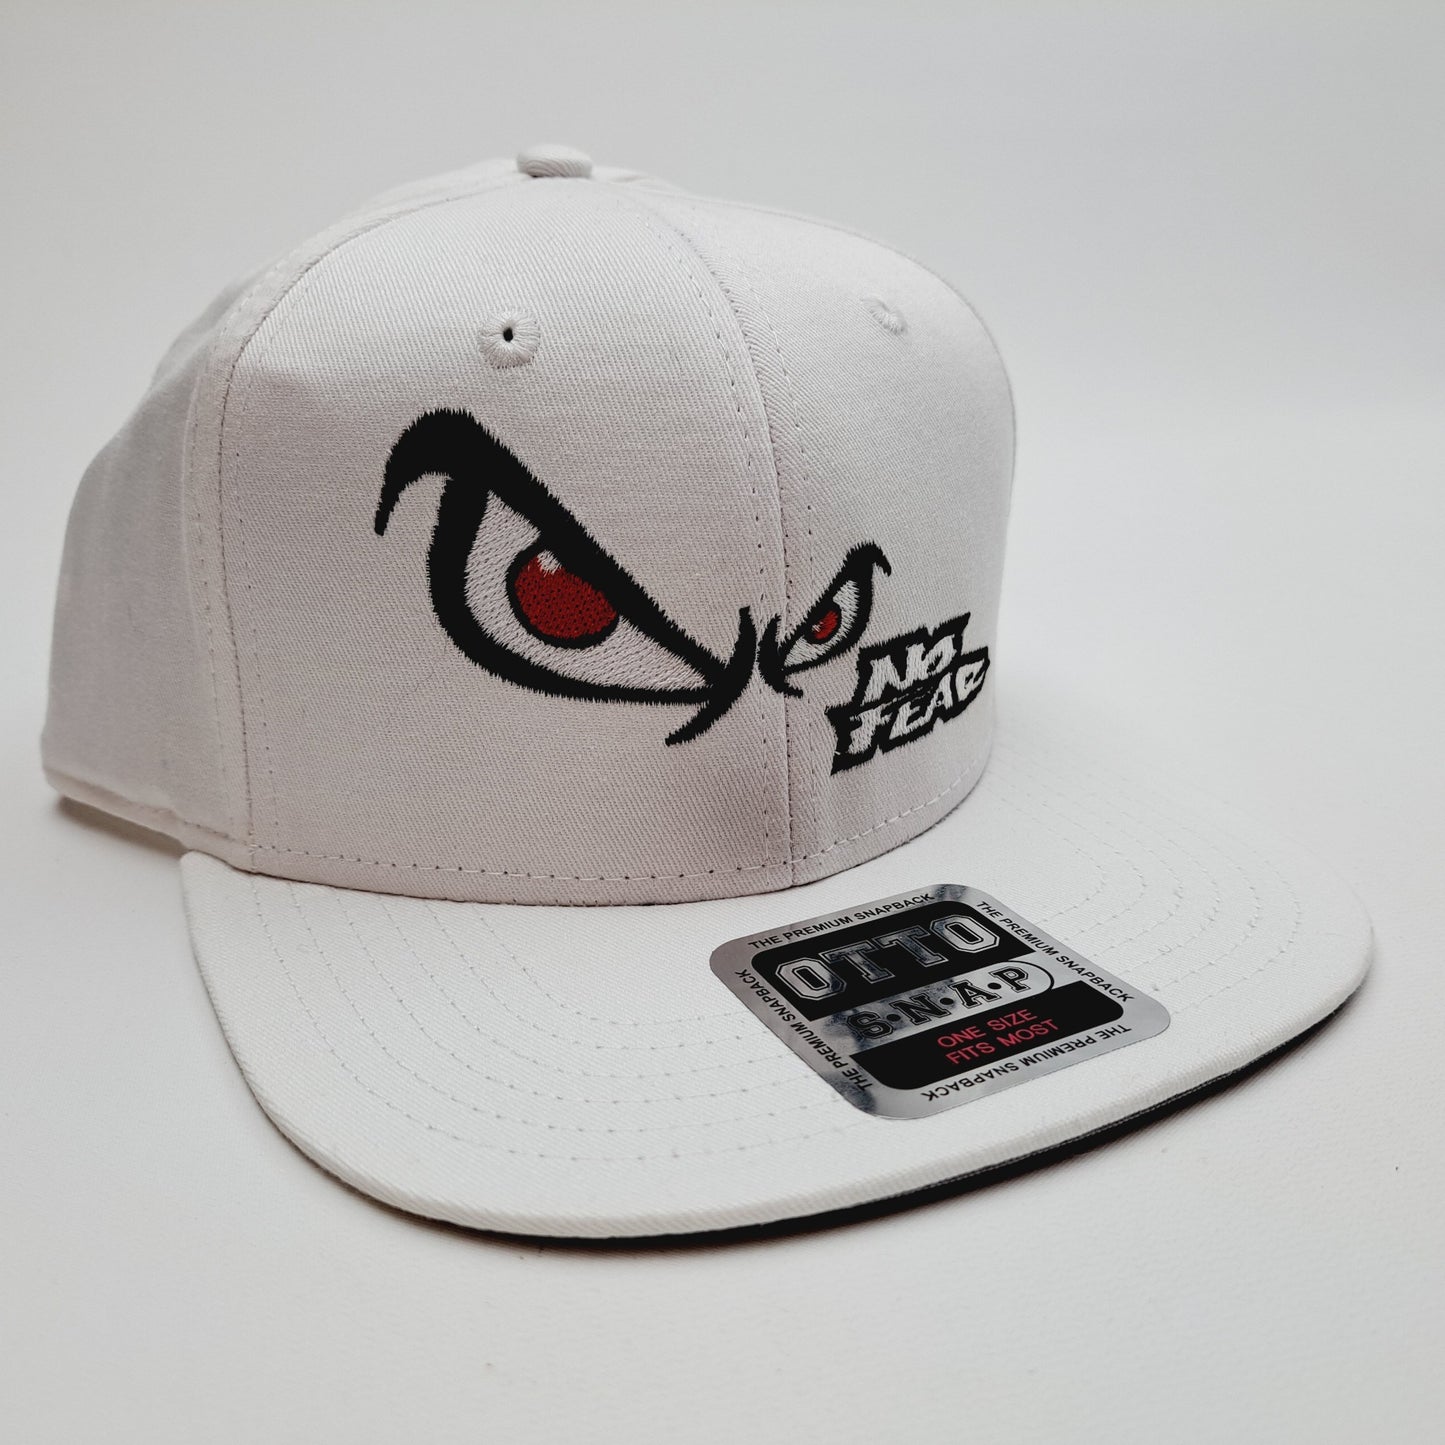 No Fear Angry Eyes Otto Curved Bill Full Cover Snapback Trucker Baseball Hat Cap White